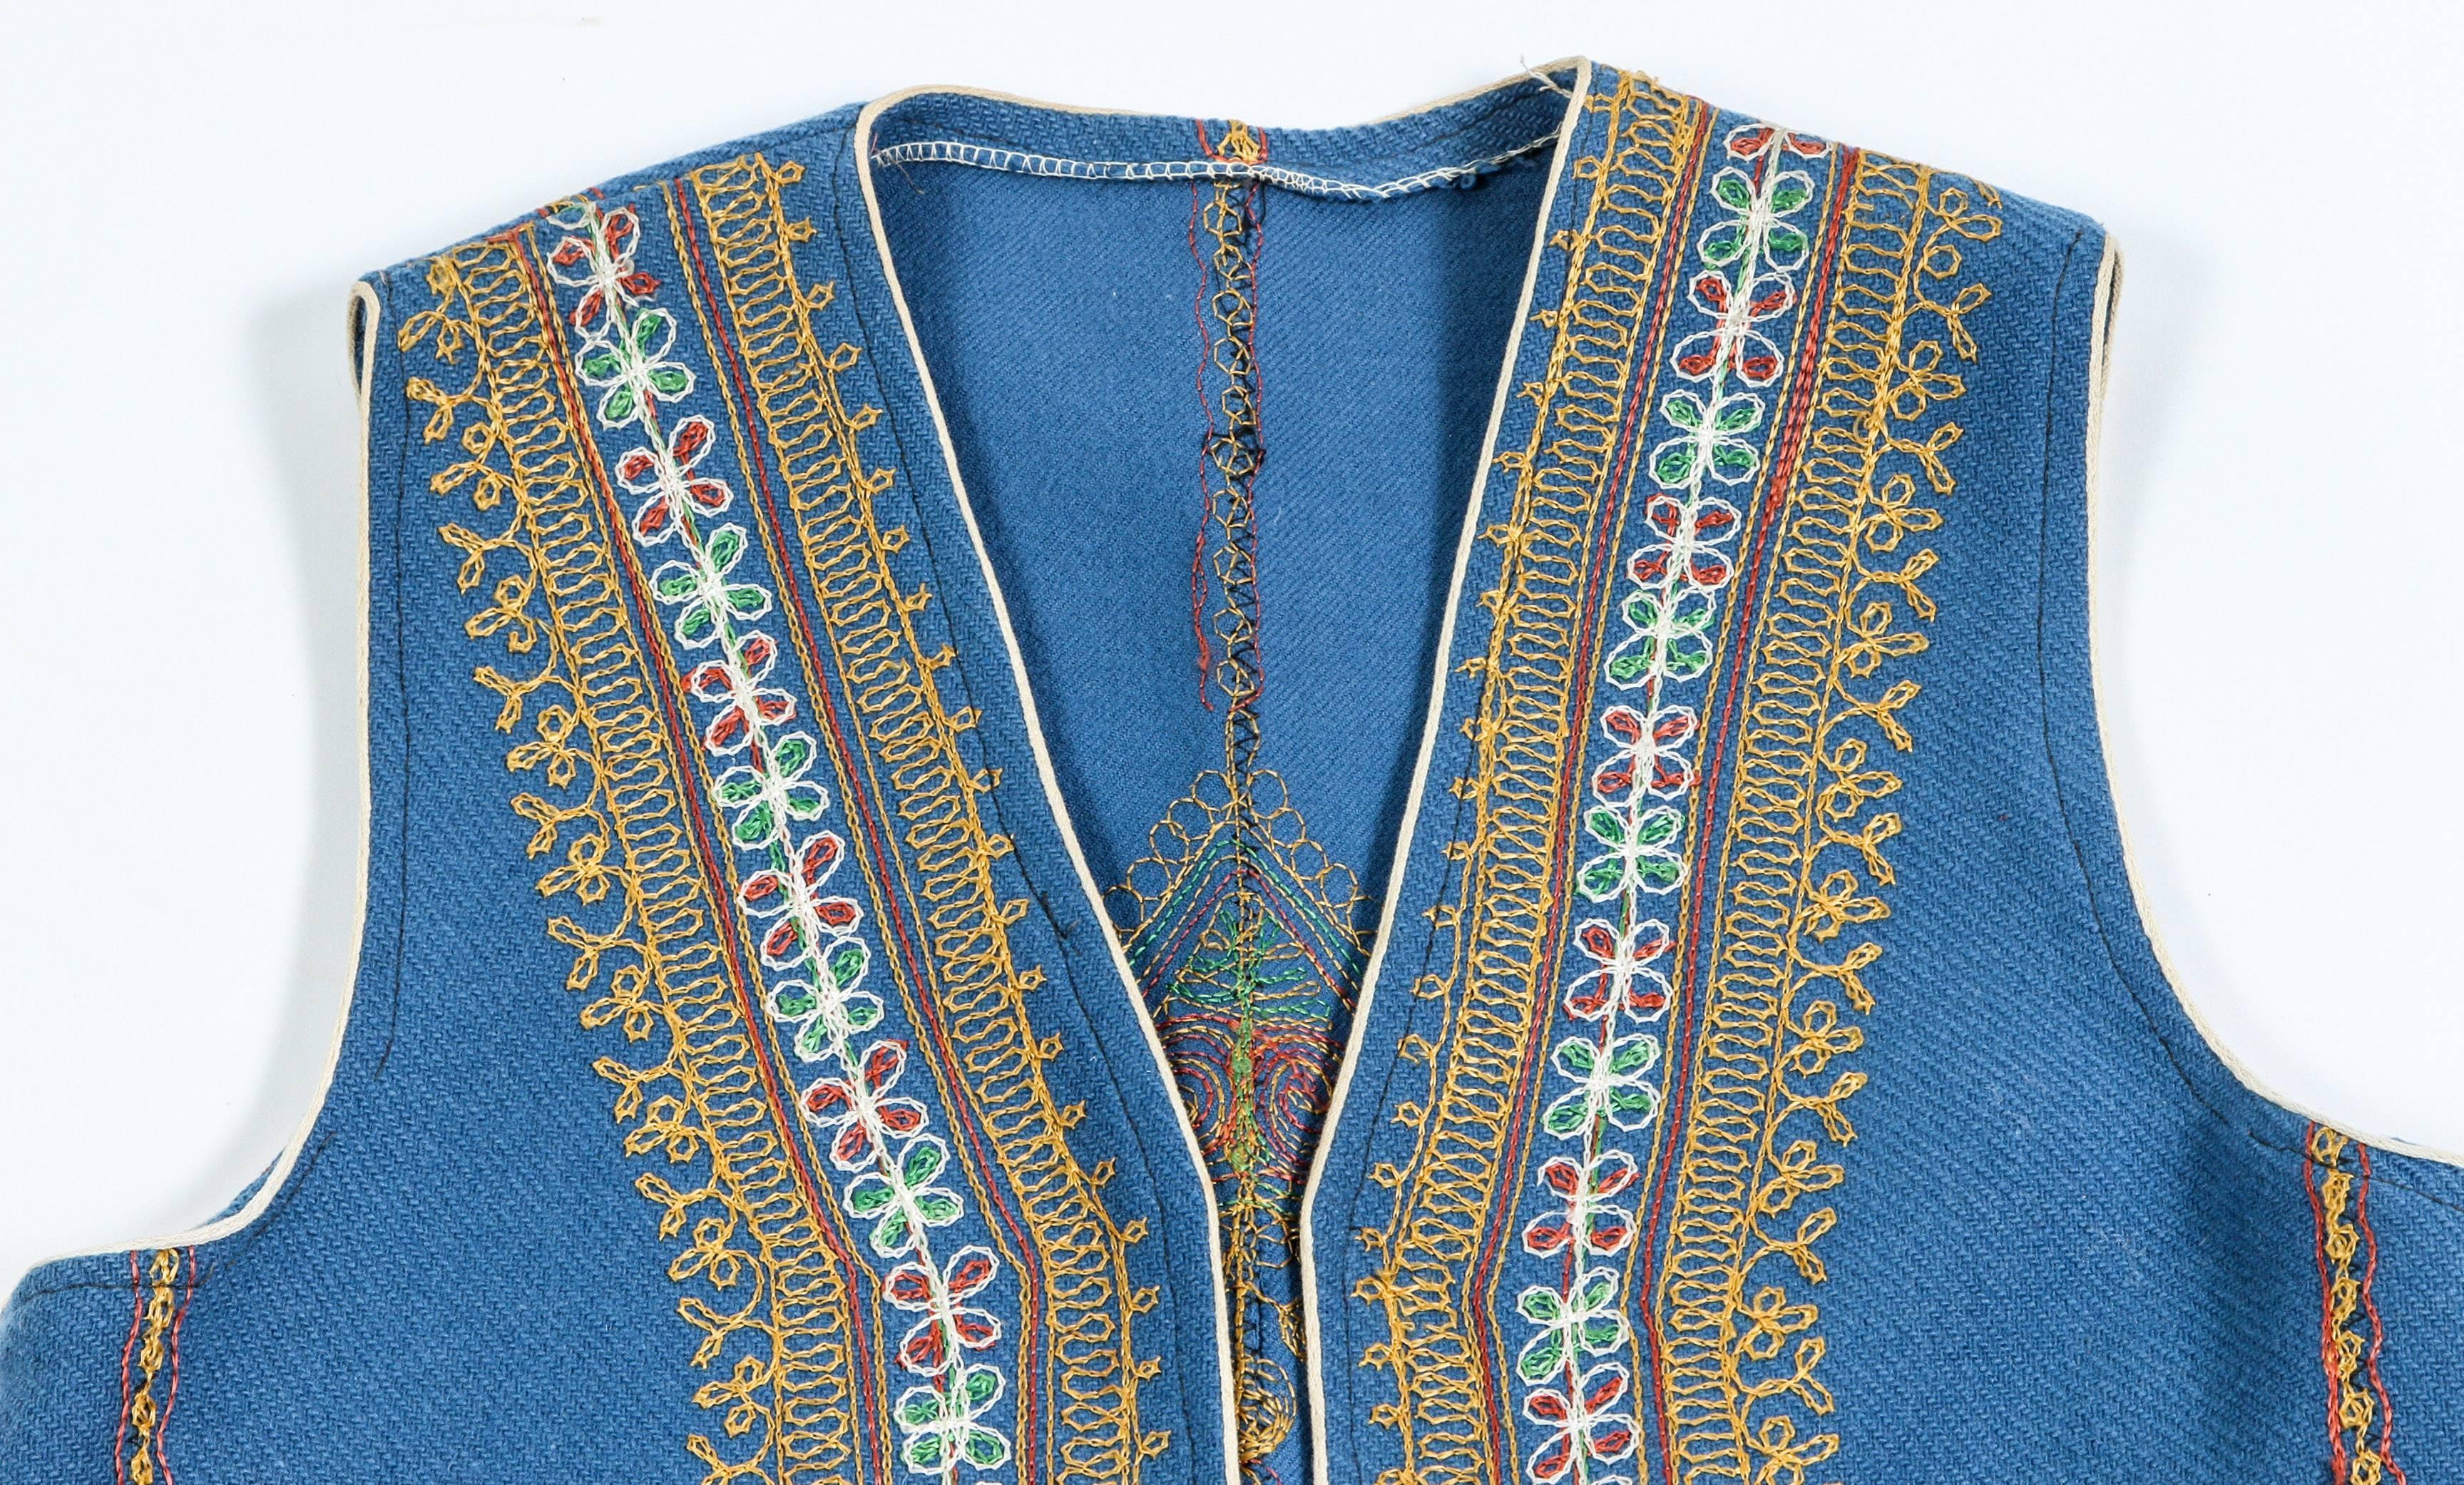 Authentic Vintage ethnic Turkish vest in blue decorated with elaborate embroidered and two pockets,
Part of the traditional Turkish folk costume. 
Measurements: 
height 24.5